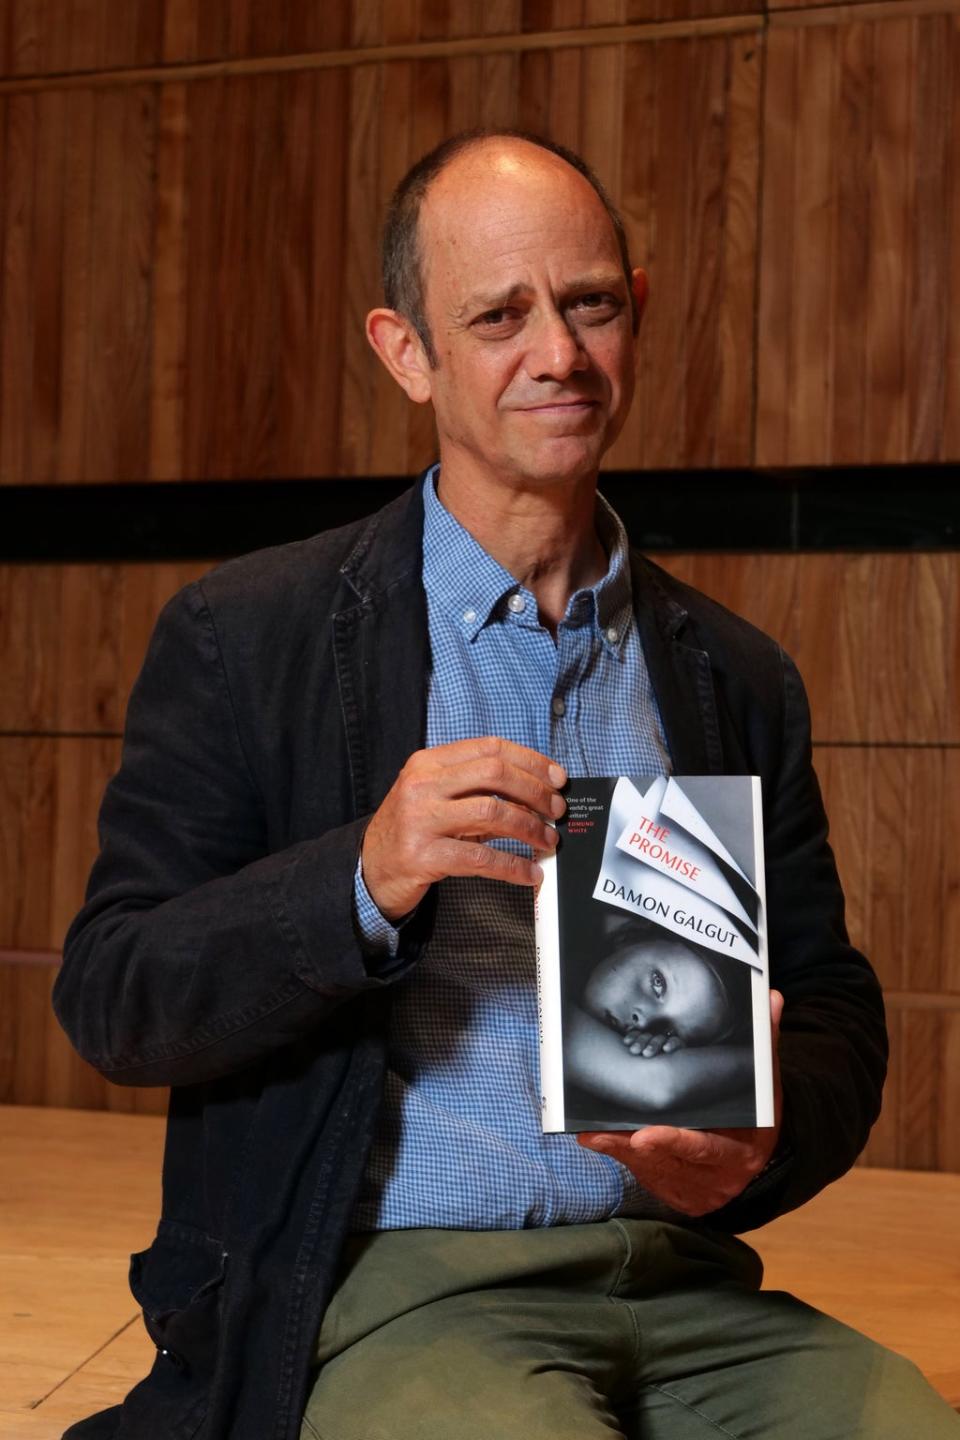 Damon Galgut at the 2021 Booker Prize shortlist readings at the Southbank Centre in London (David Sandison for The Booker Prize)